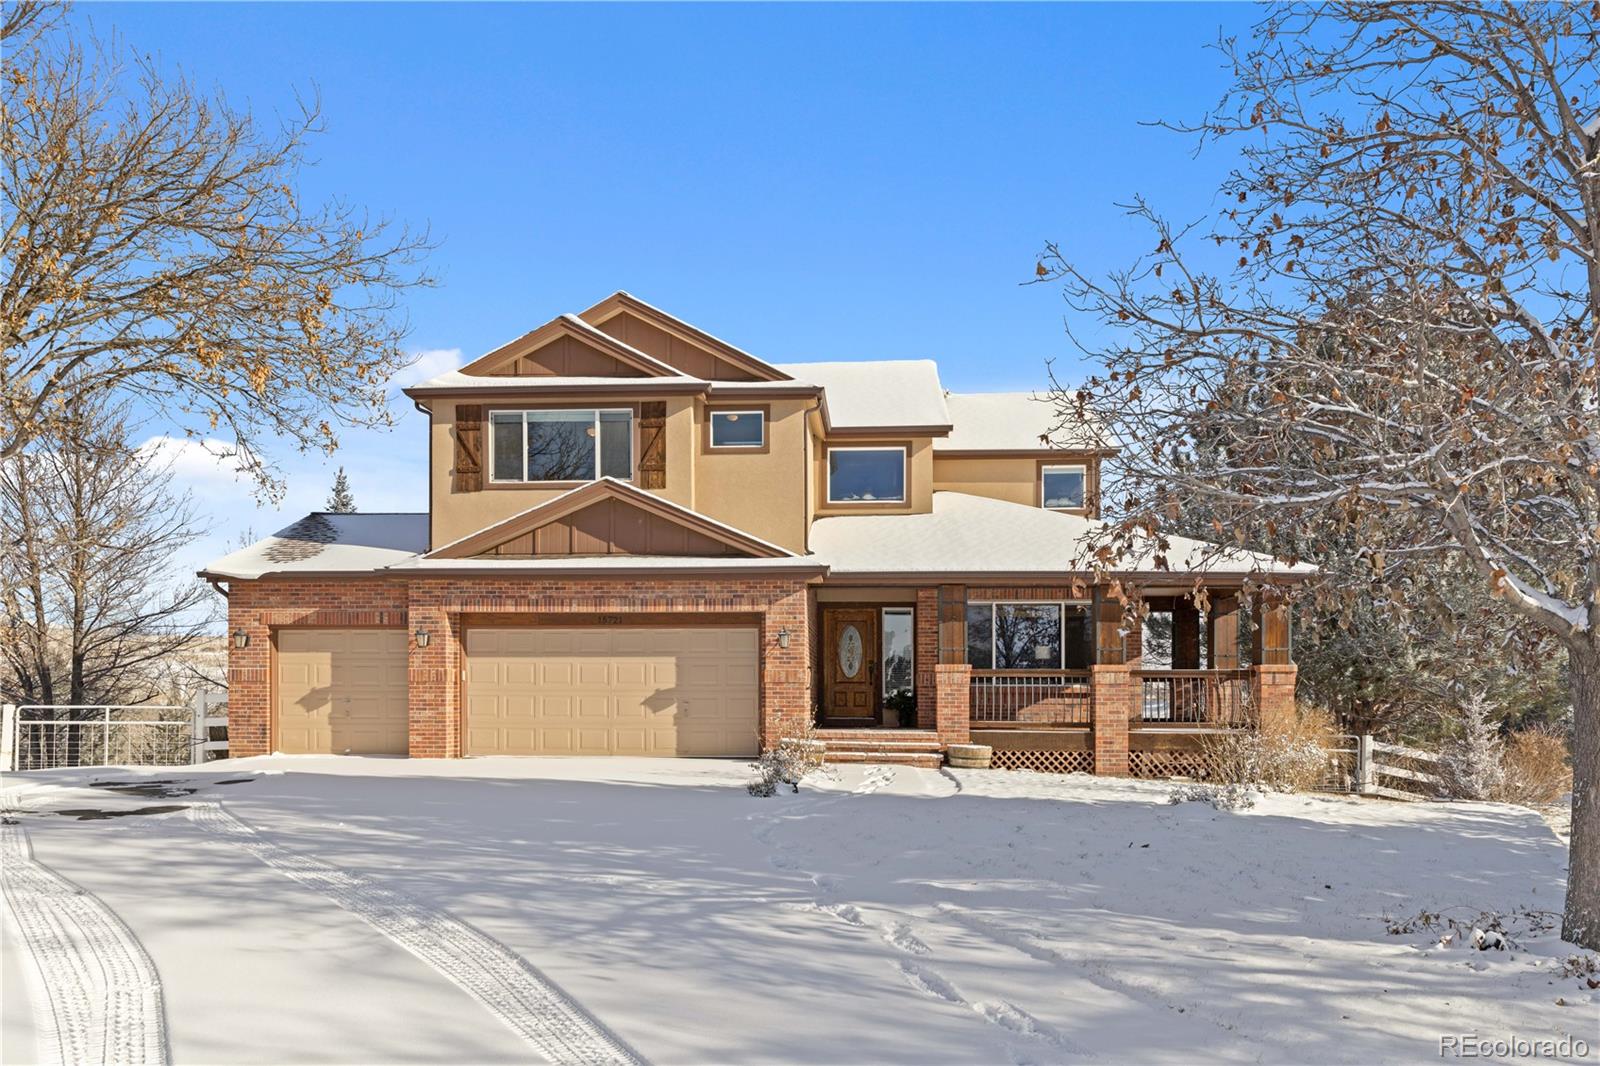 Report Image for 15721 W 79th Place,Arvada, Colorado